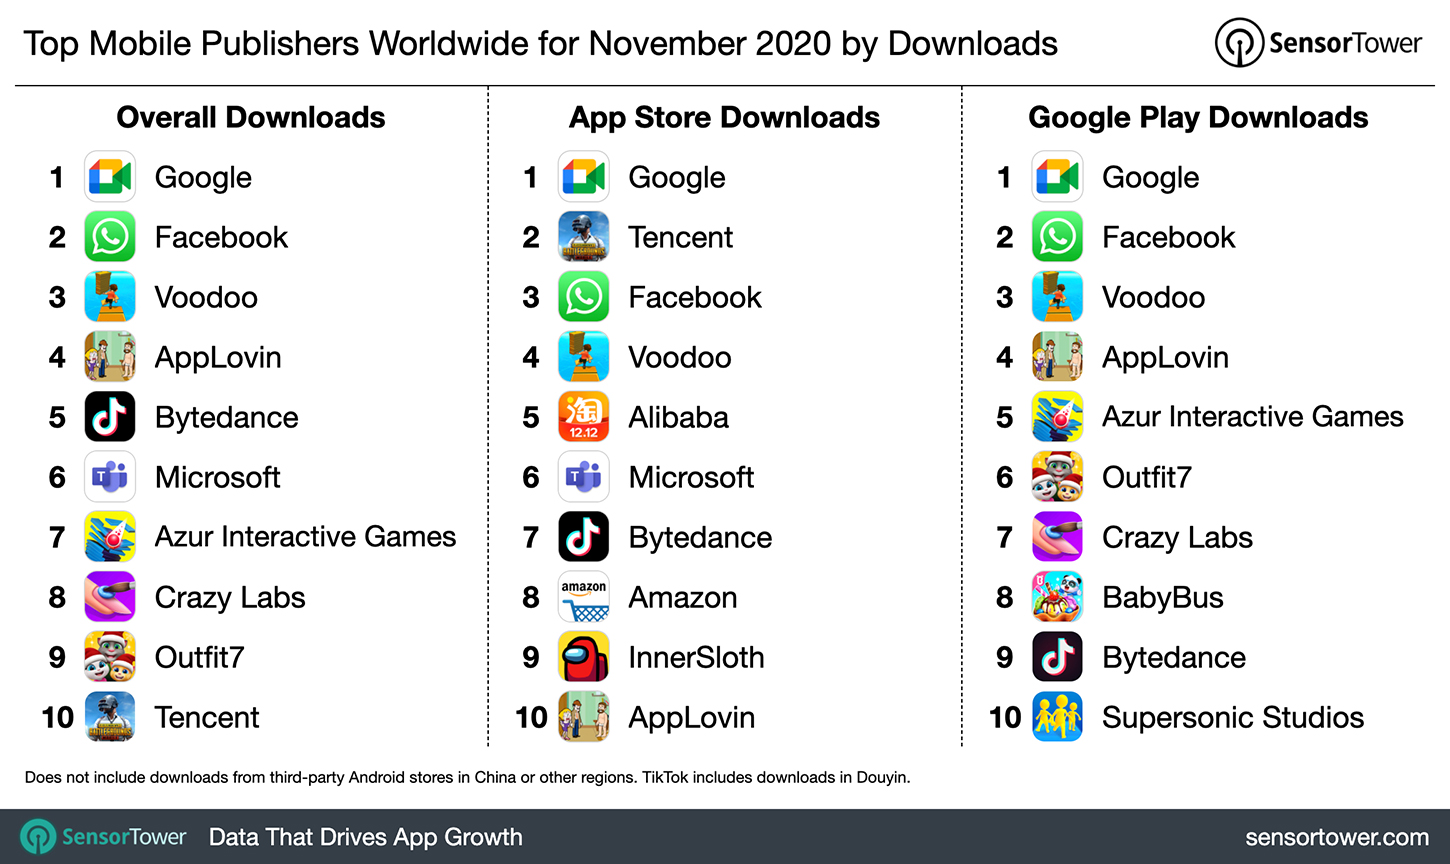 Top Mobile Publishers Worldwide for November 2020 by Downloads